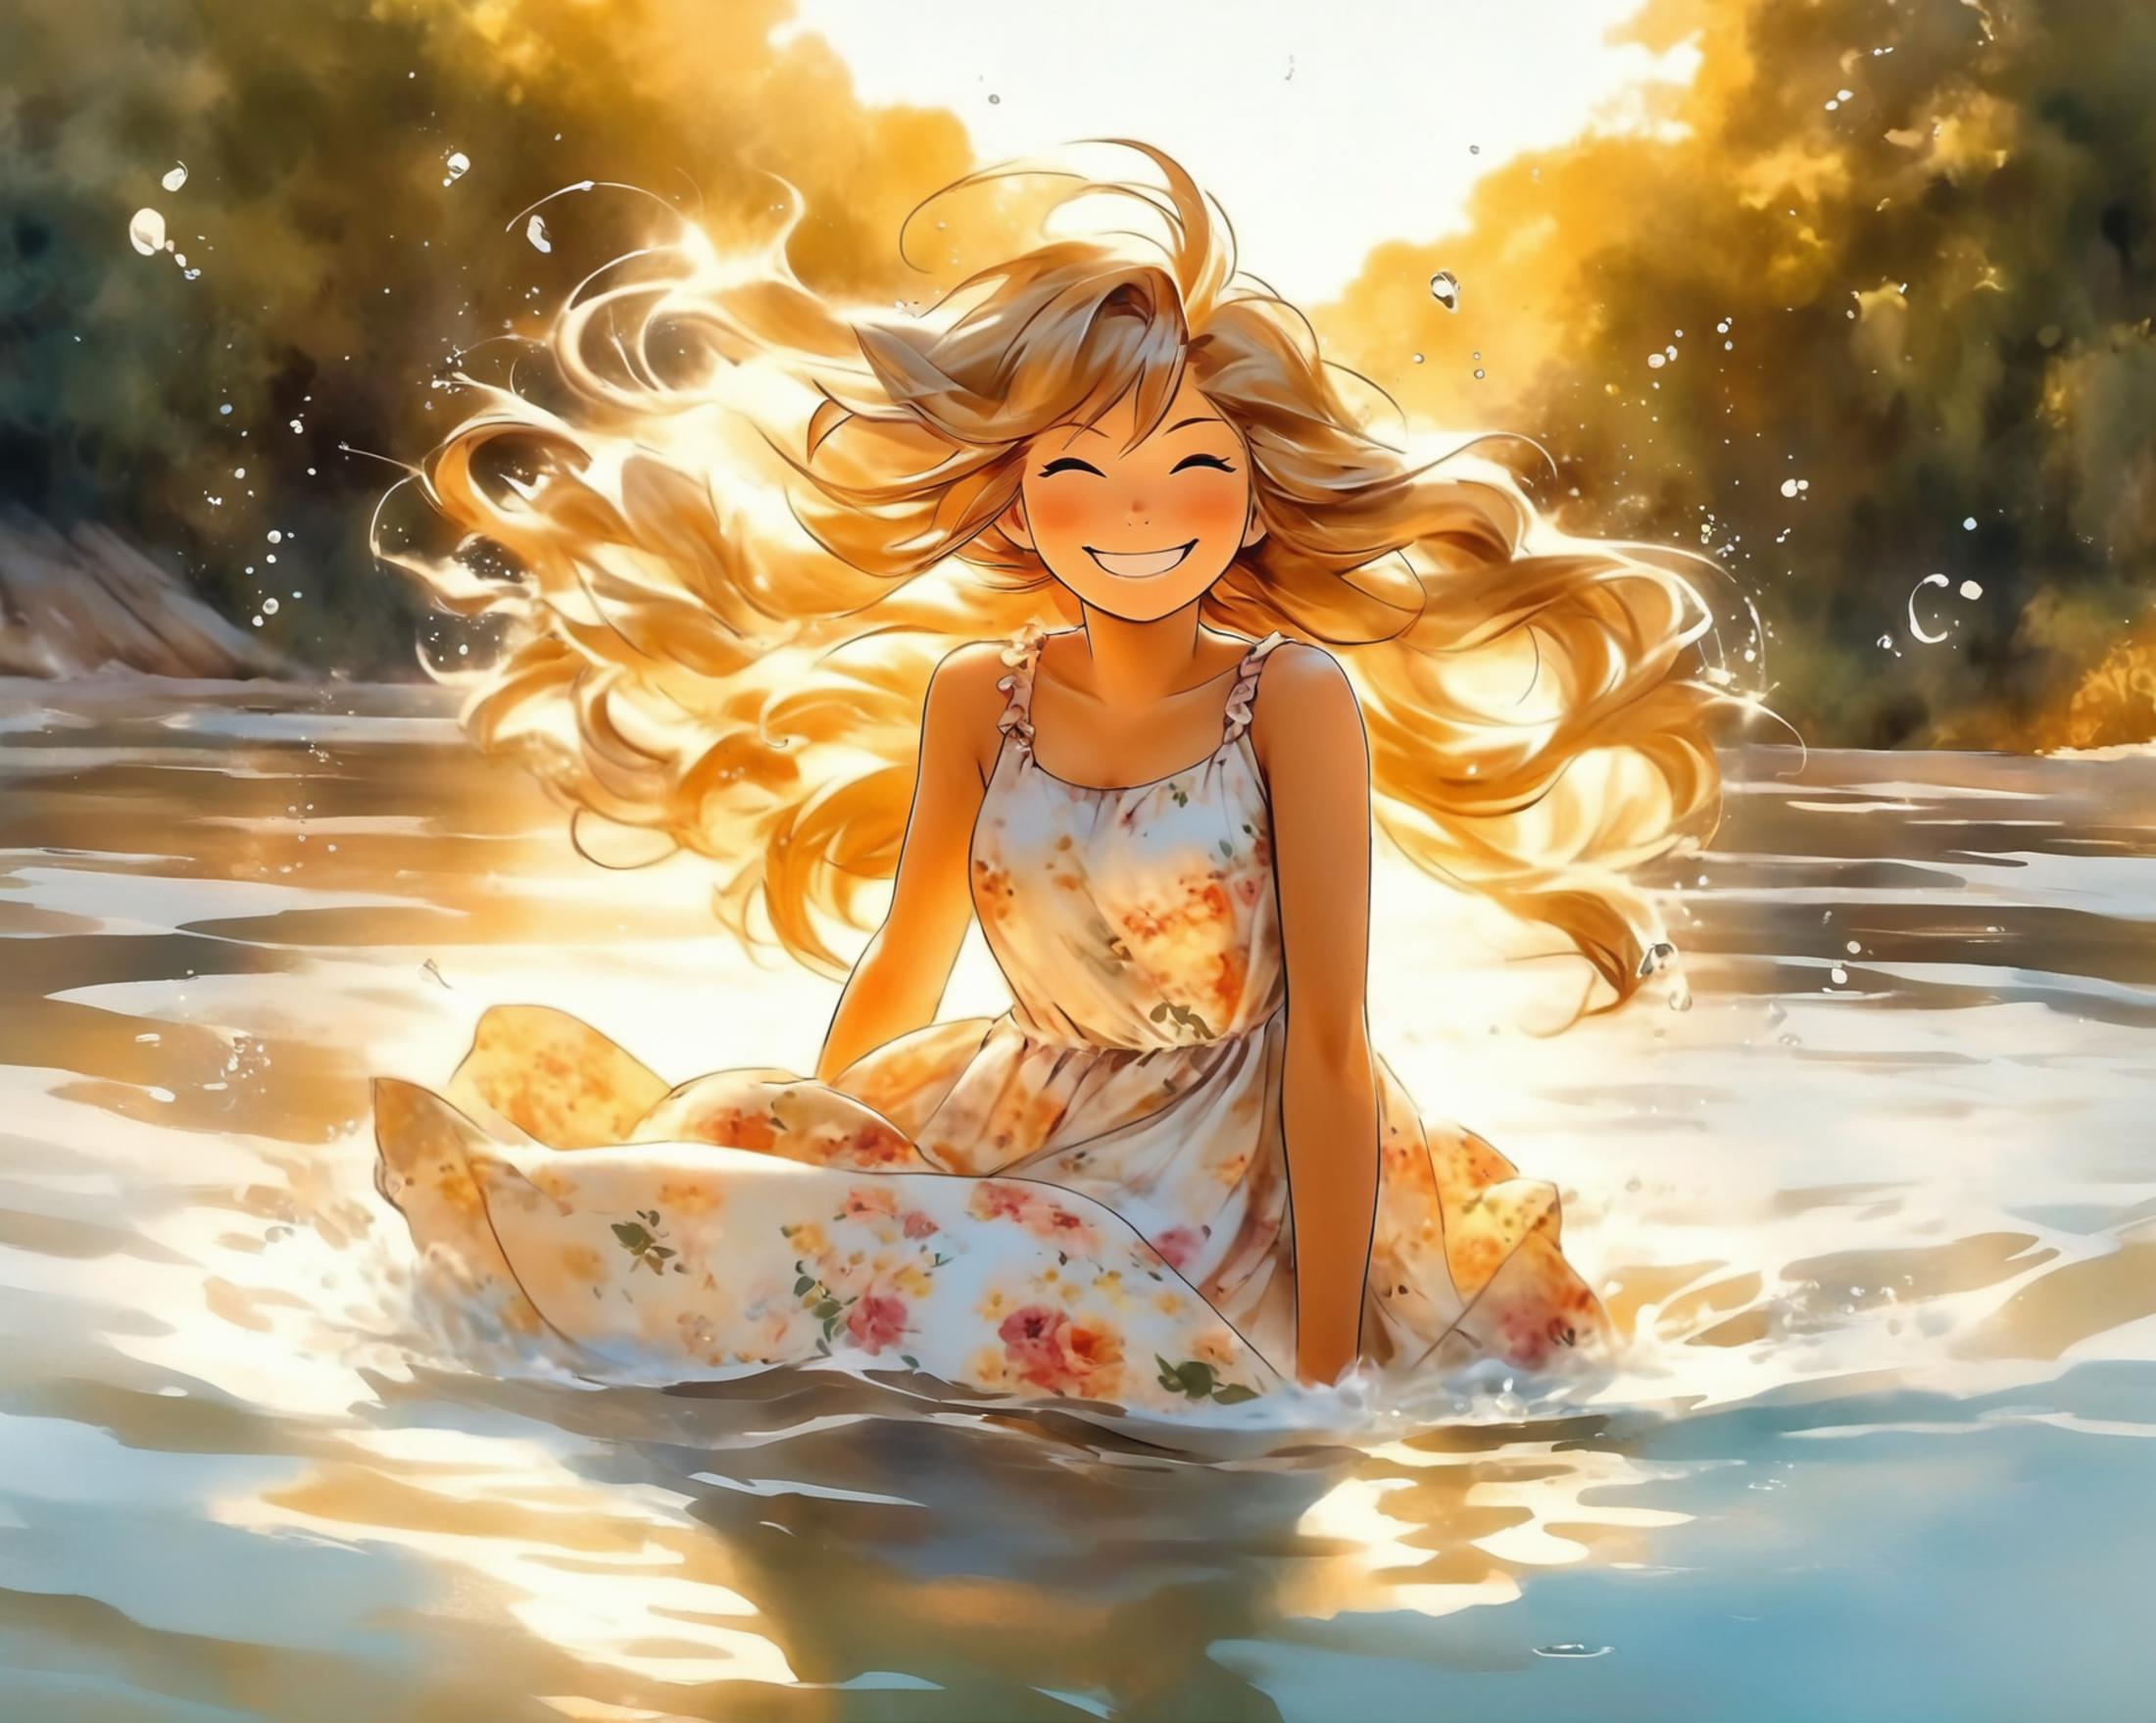 A smiling woman sitting in water with her hair blowing in the wind.